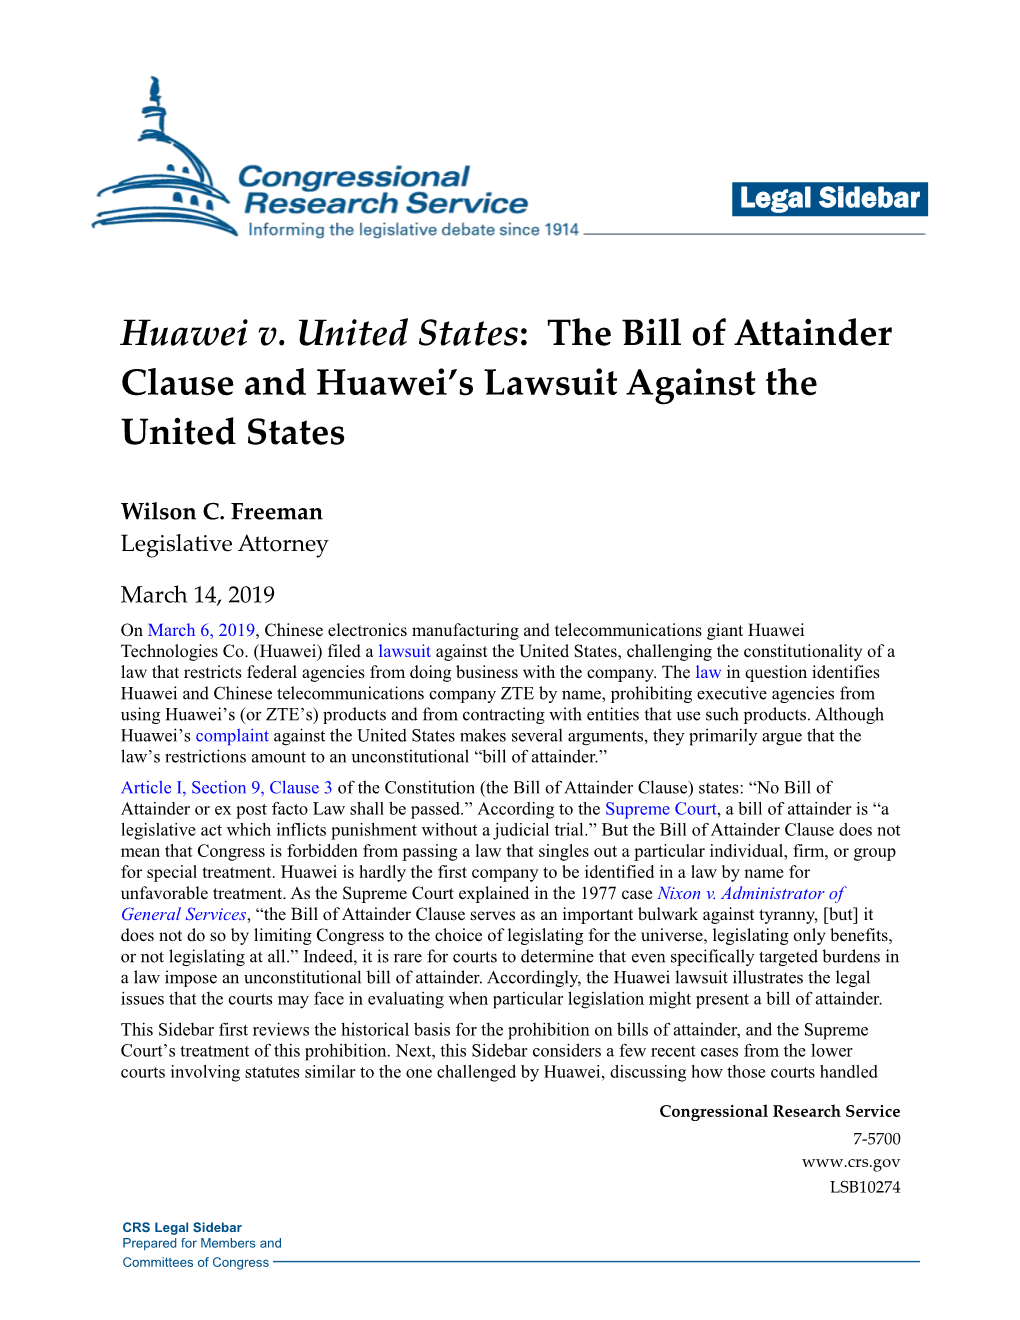 The Bill of Attainder Clause and Huawei's Lawsuit Against The